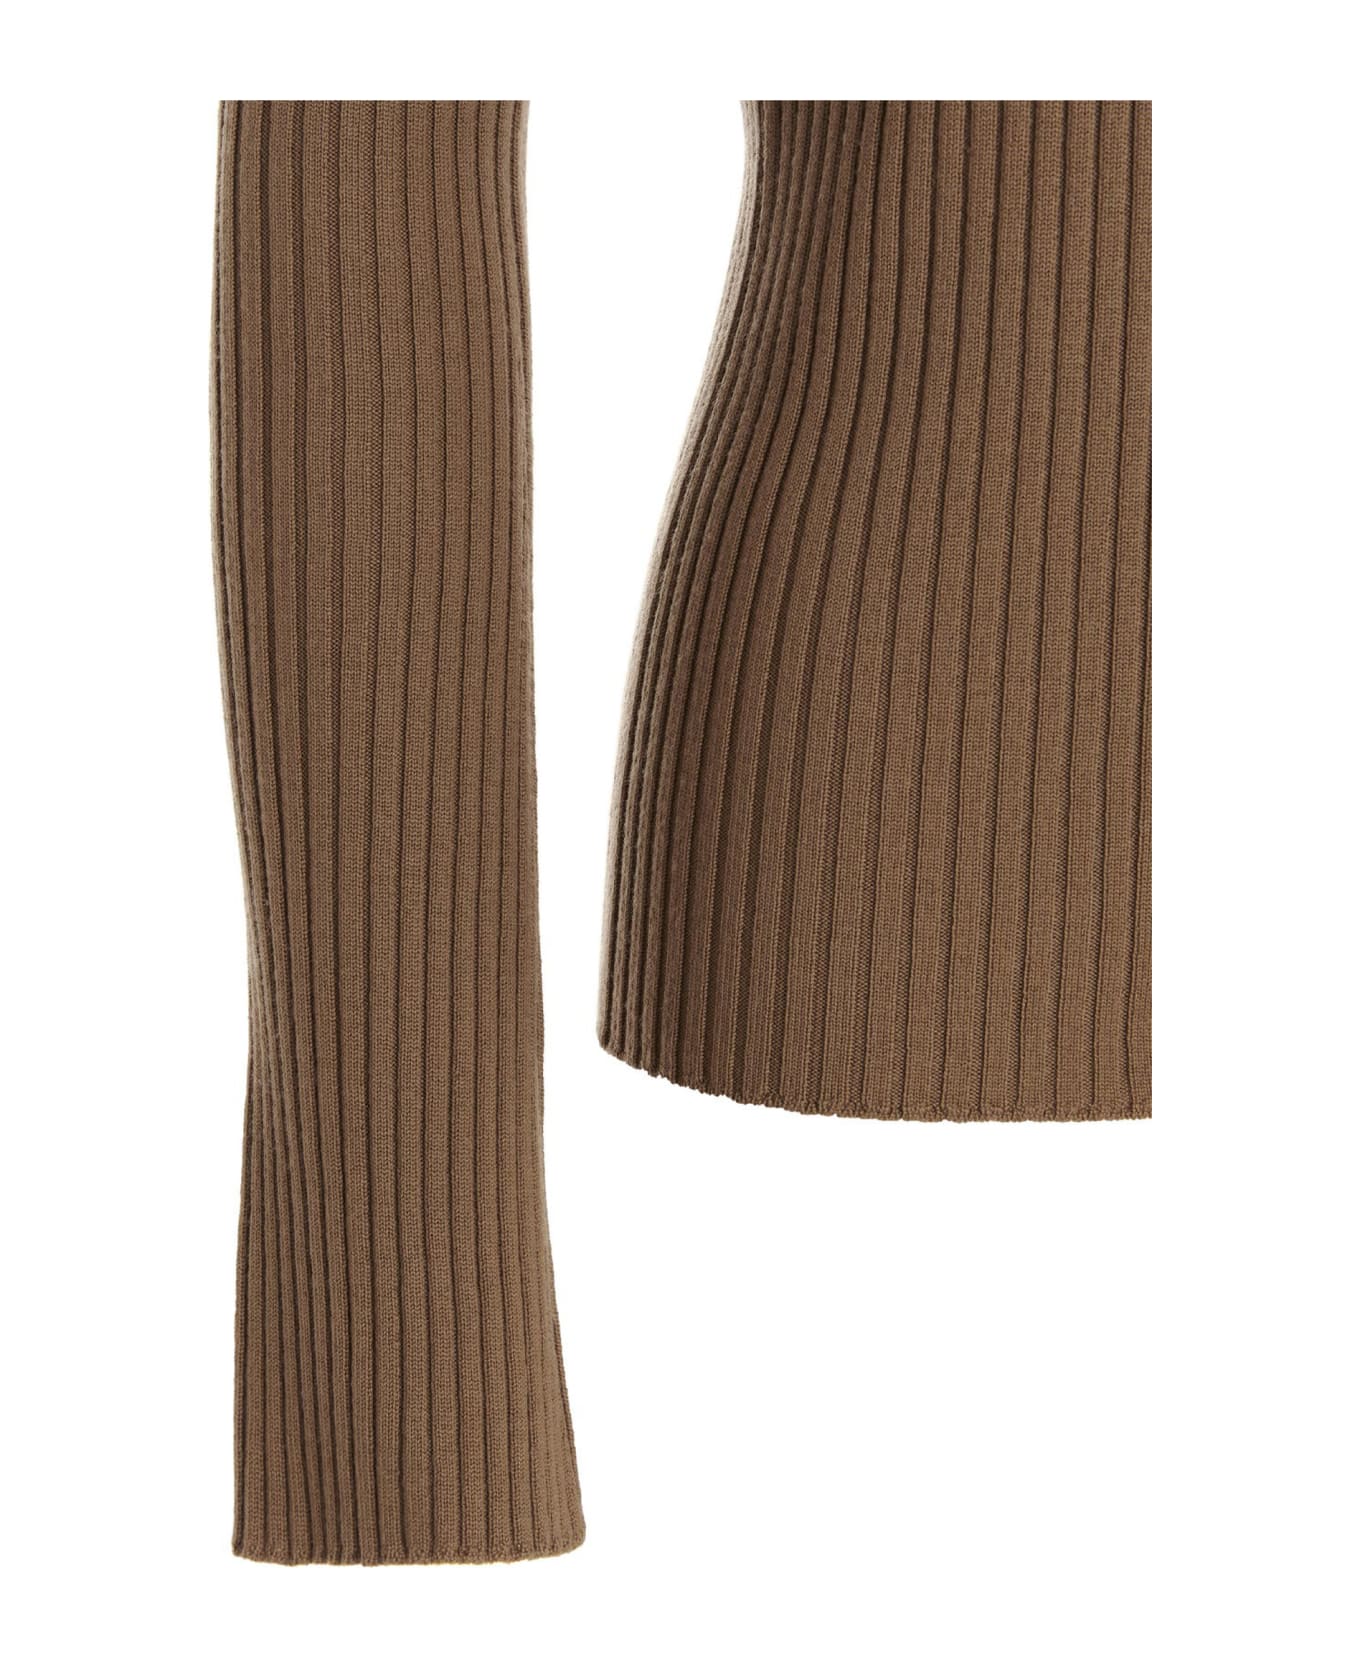 Chloé Ribbed Sweater - Brown